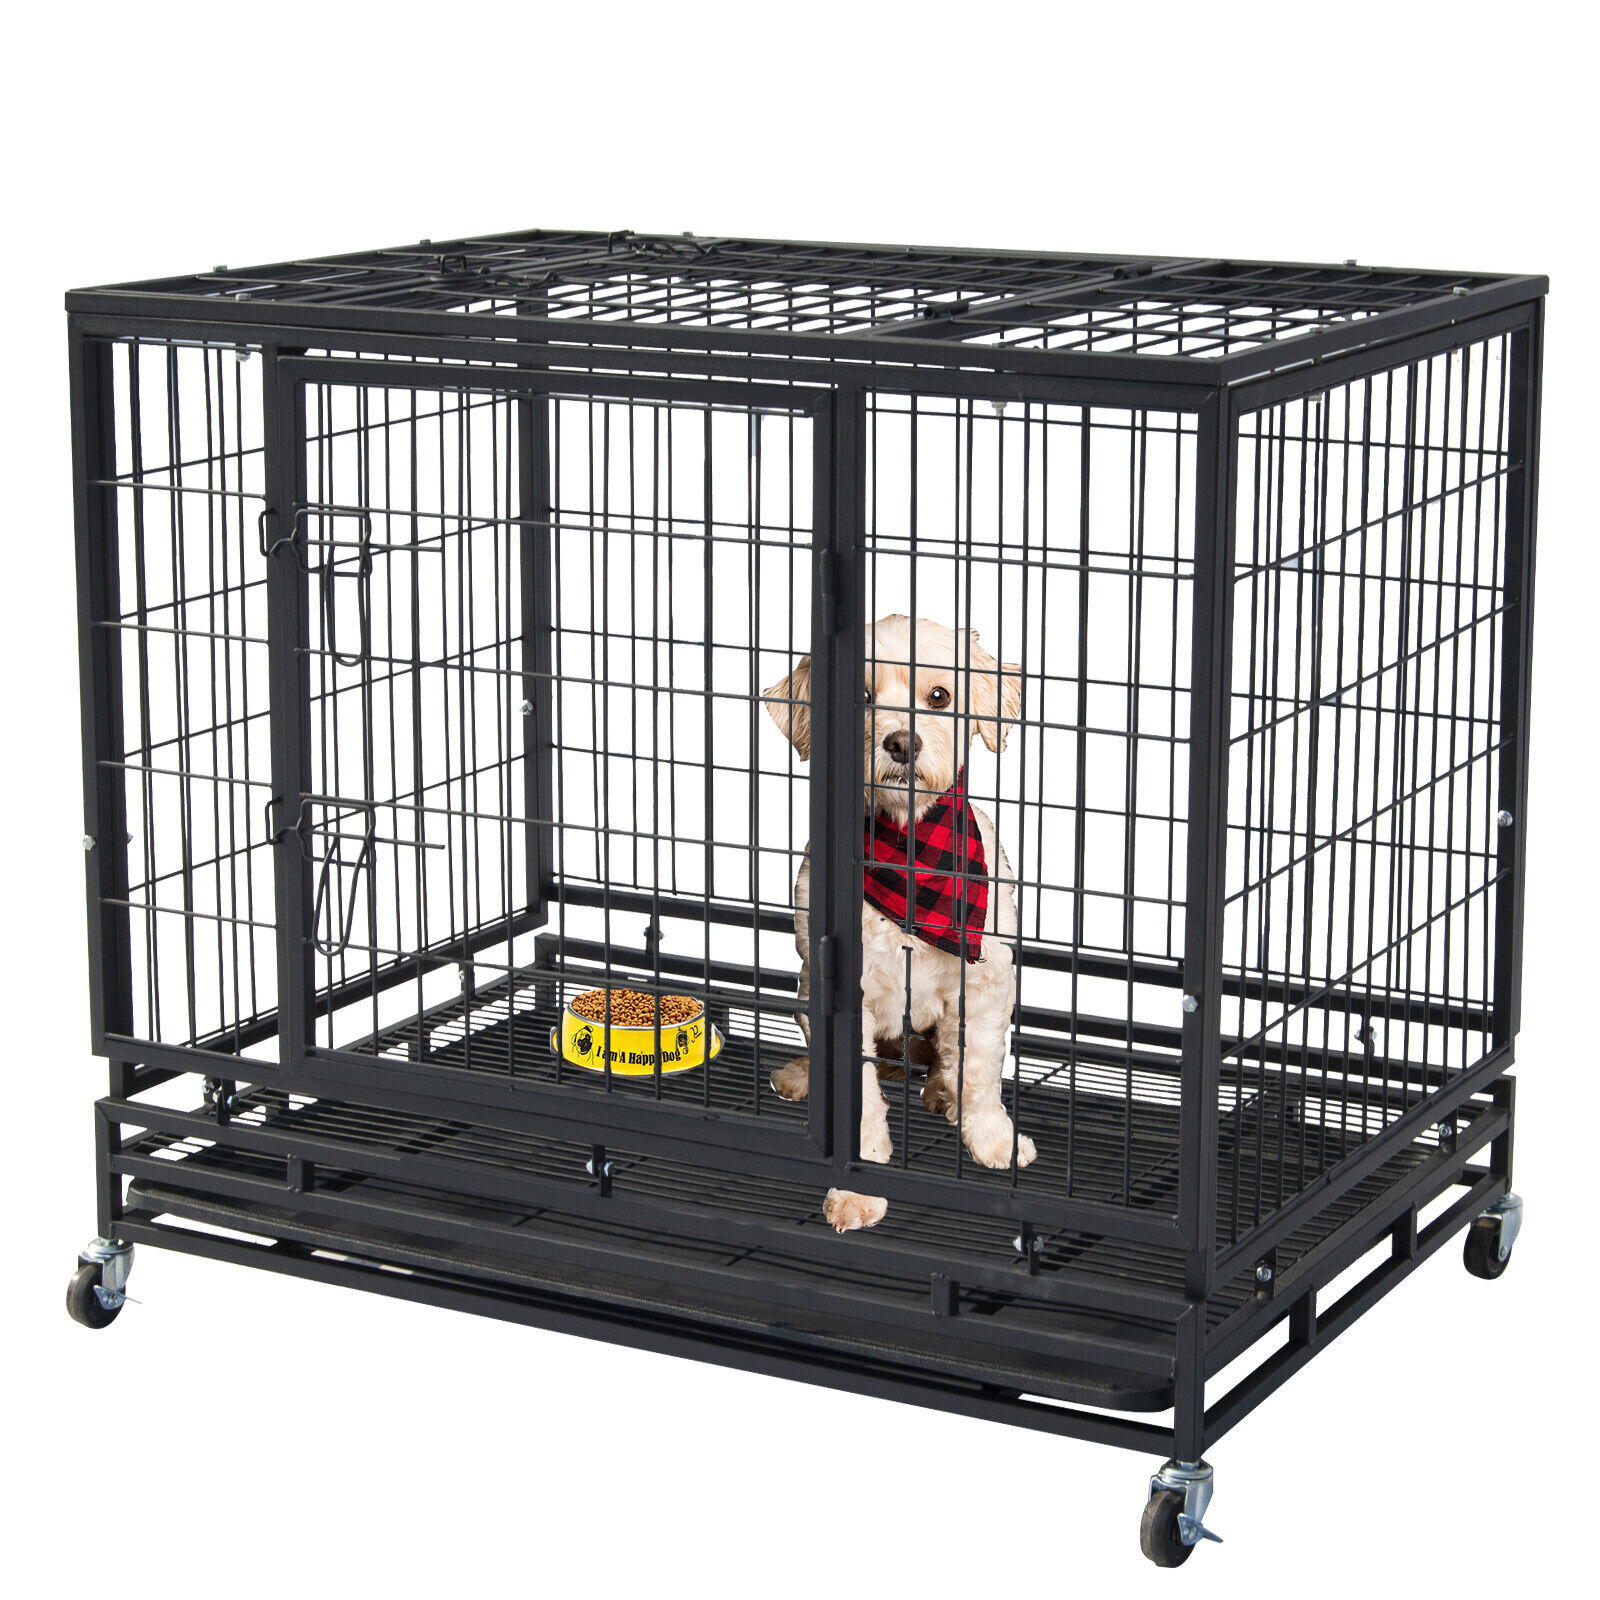 46 pet dog cage heavy duty strong